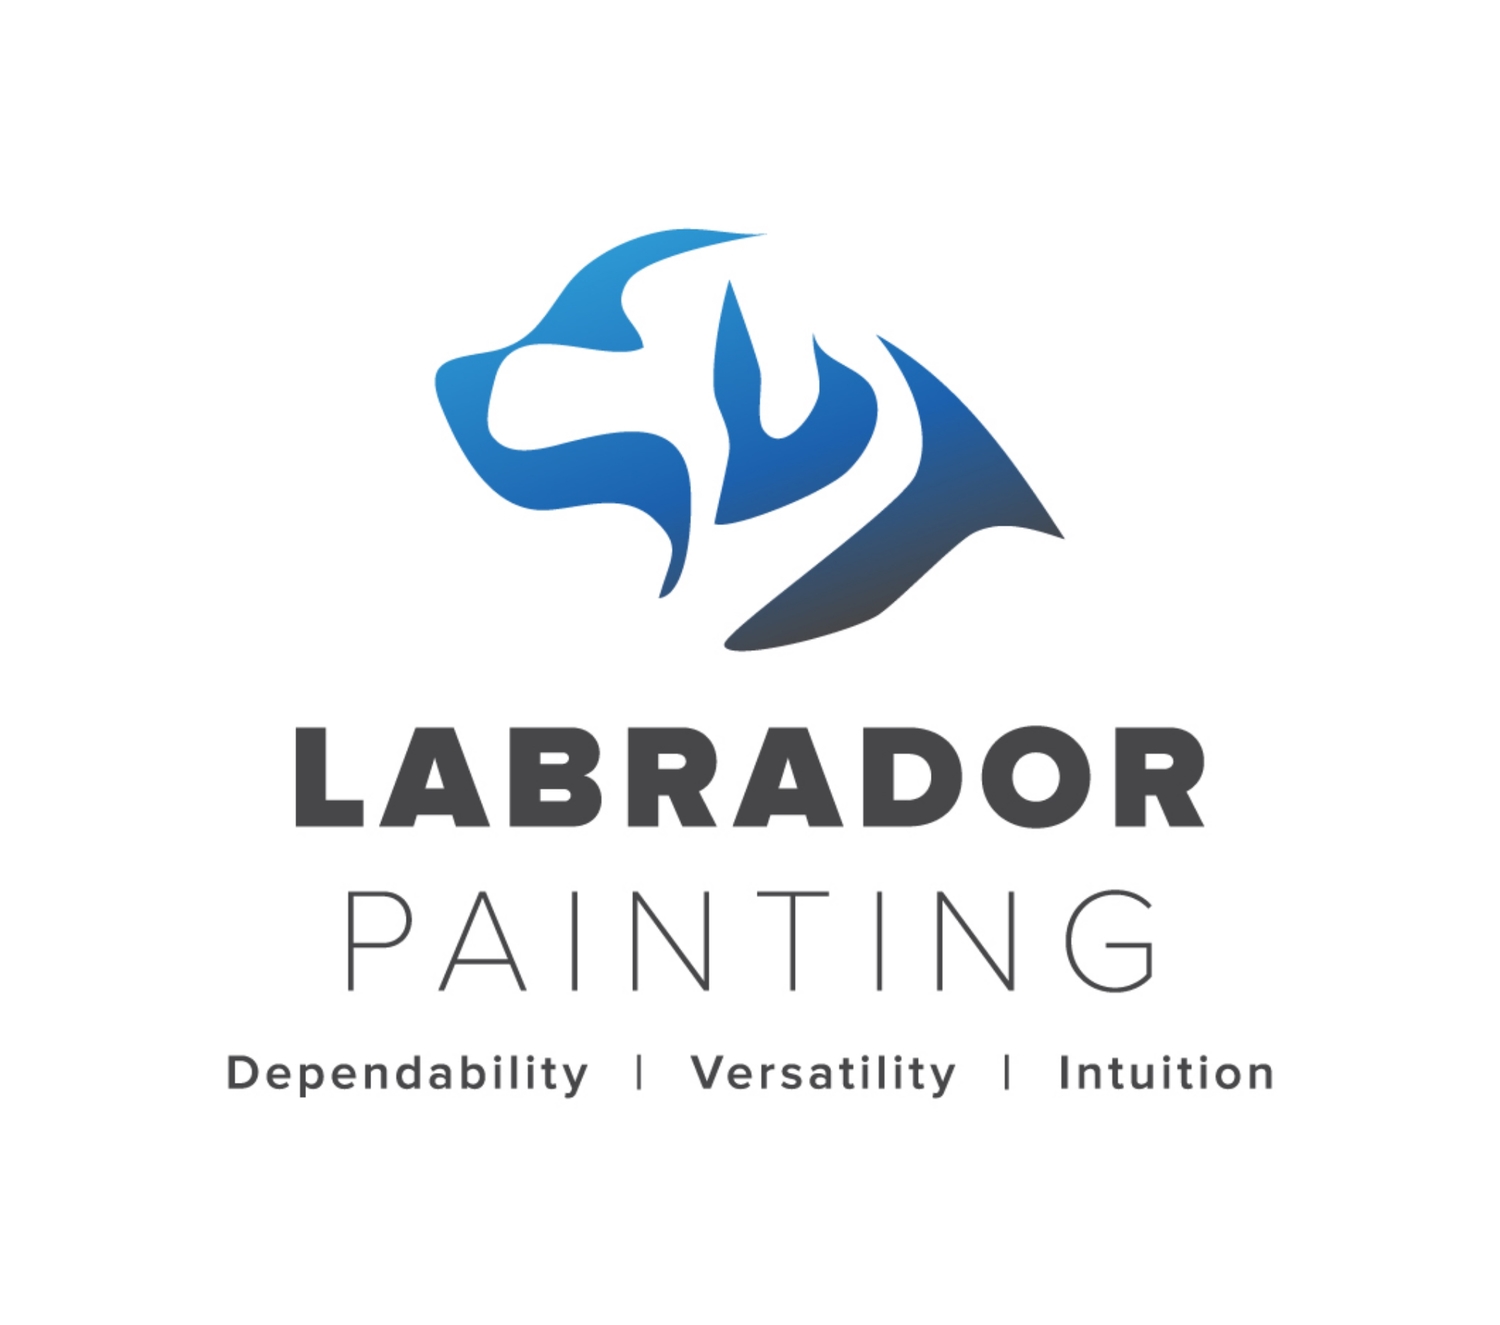 Labrador Painting. Manly. Northern Beaches Painters.